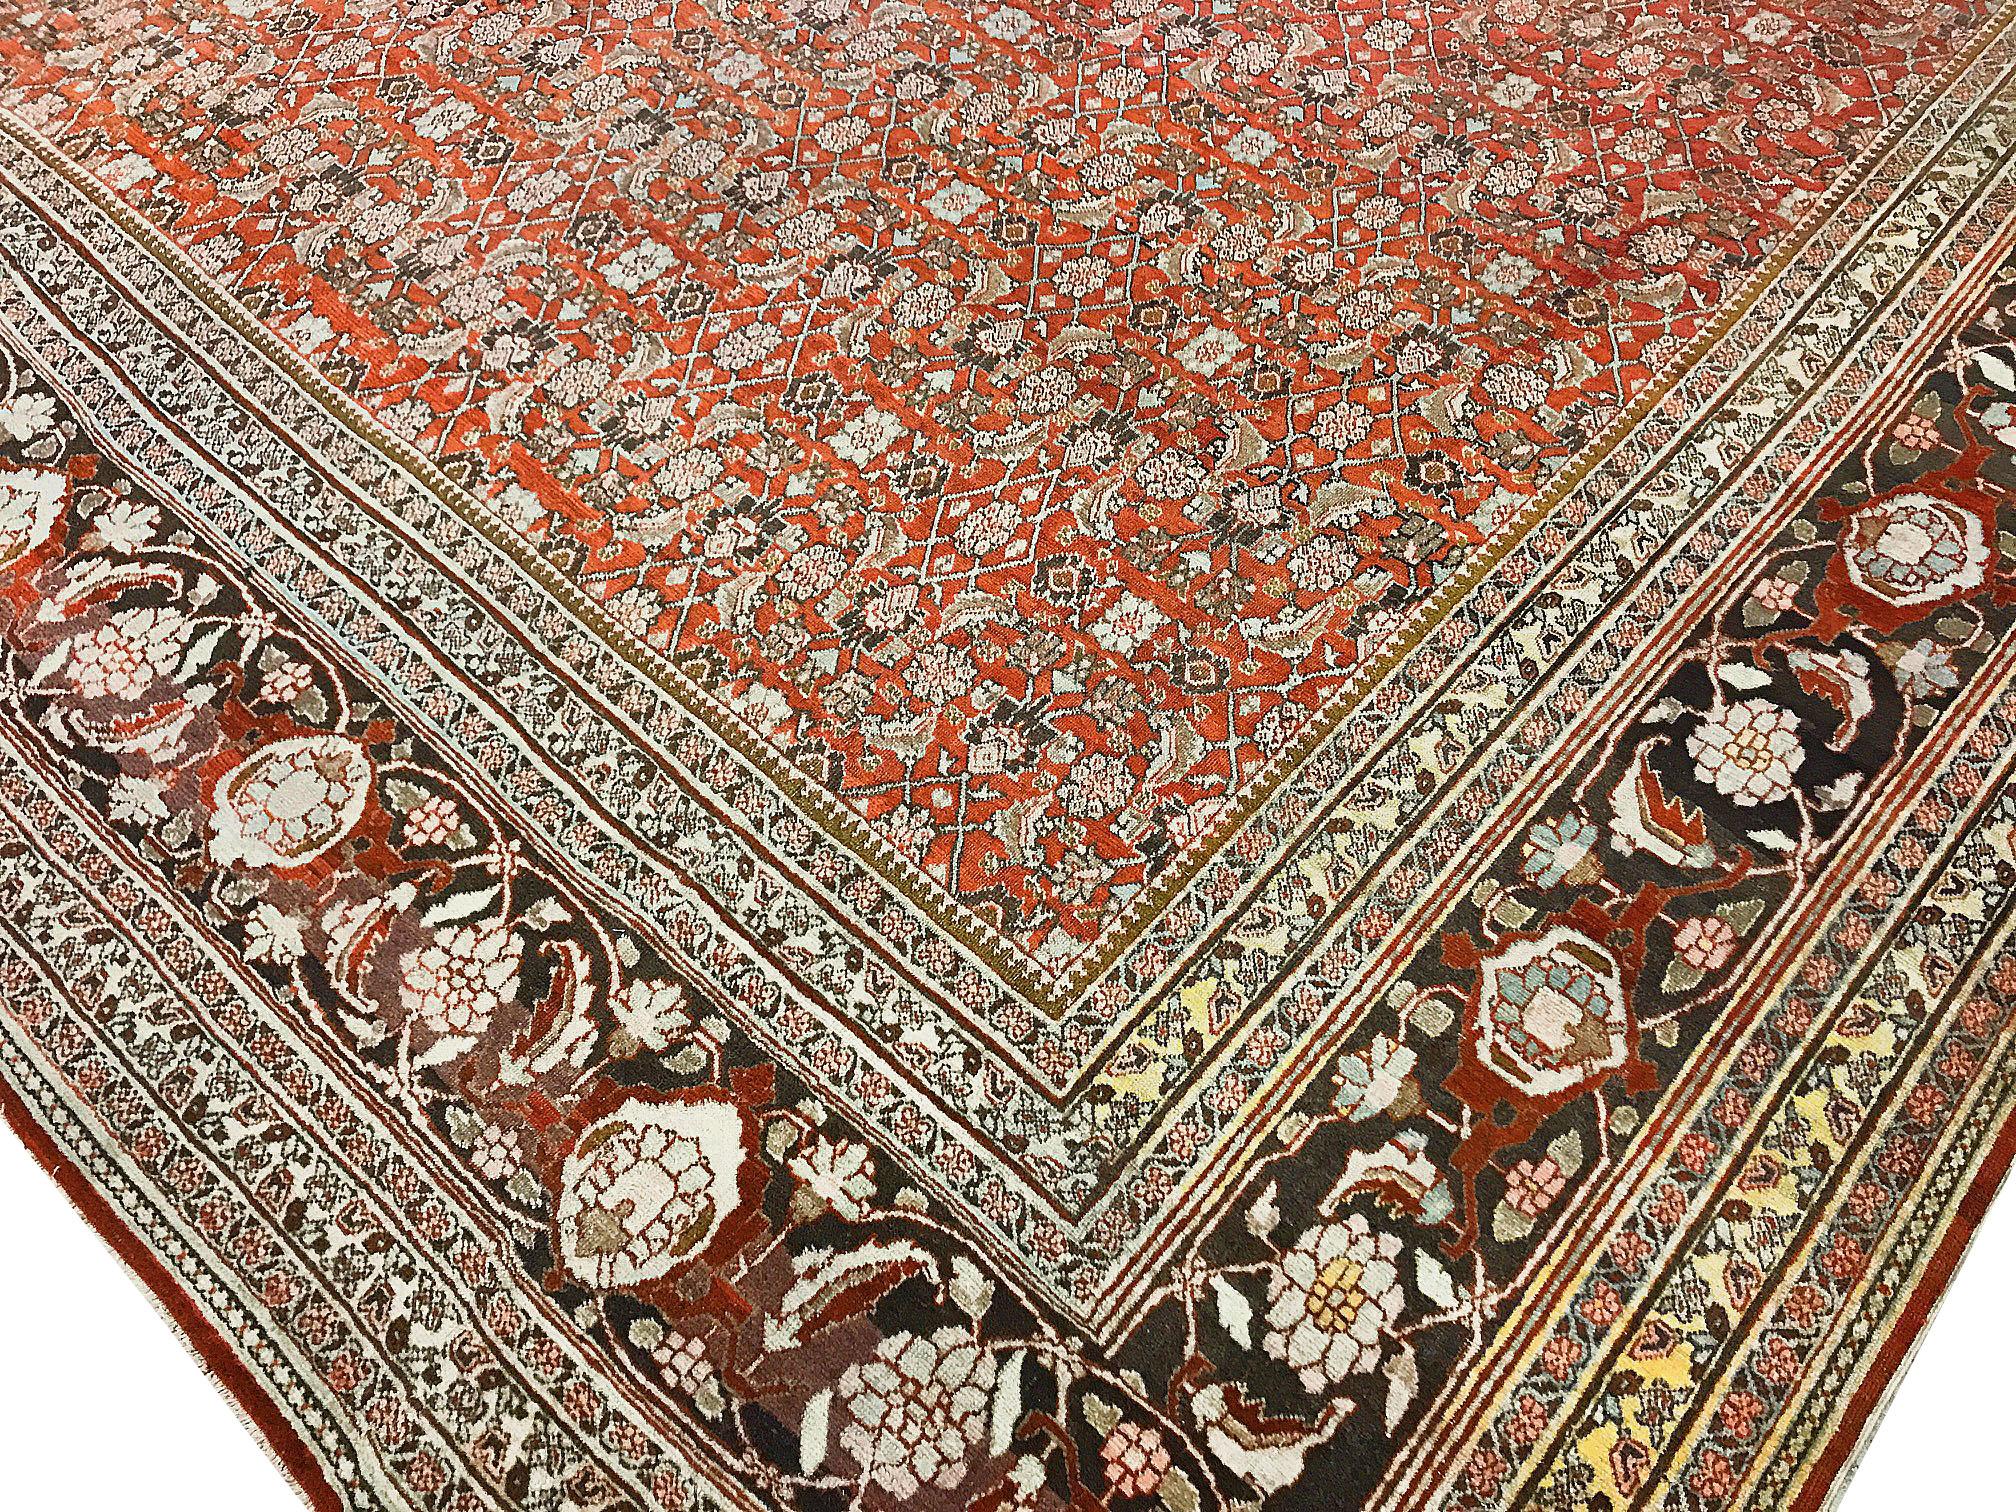 Vintage Persian Oversize Tabriz rug carpet. Measures: 11' x 17'5. A vintage circa 1940s Tabriz handwoven rug. The central field with floral themed designs surrounded by a commanding main border to give the rug a soft yet powerful look. The rug is in